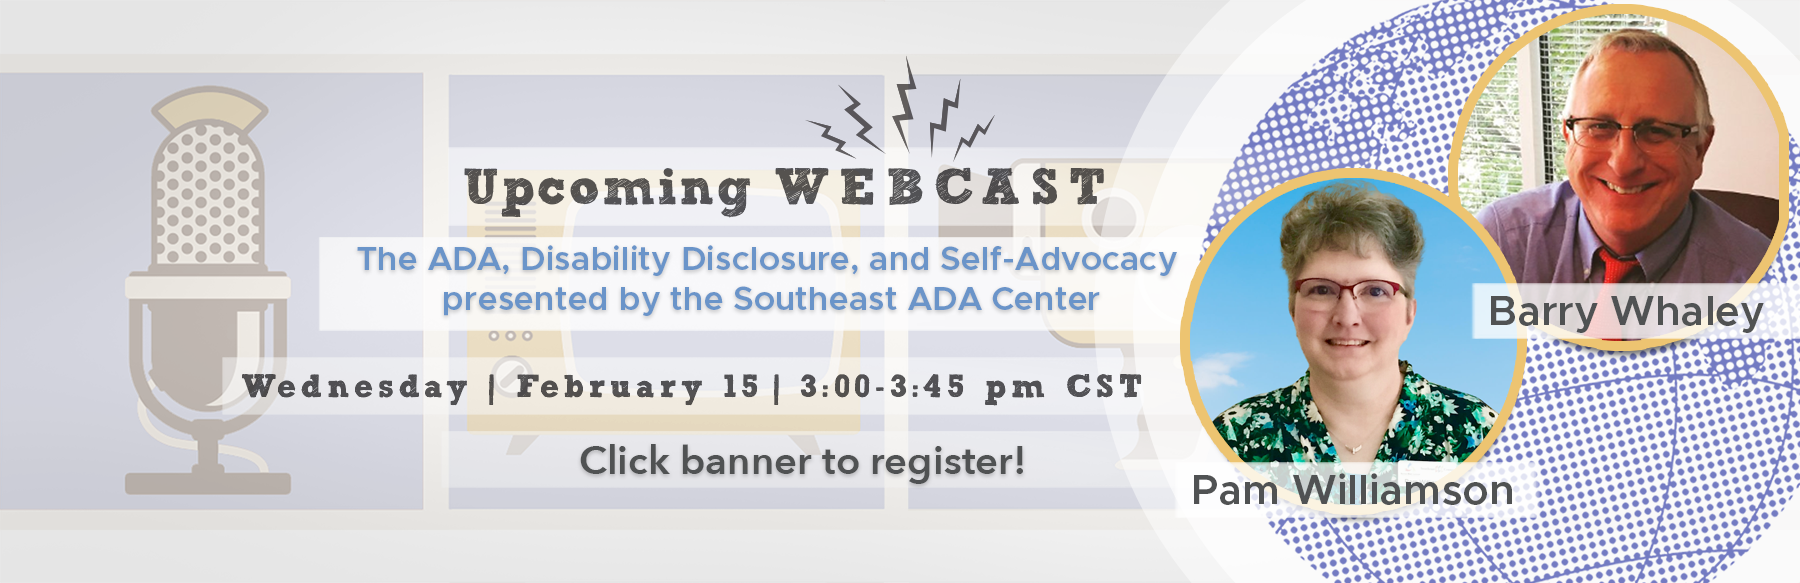 The ADA, Disability Disclosure, and Self-Advocacy, presented by the Southeast ADA Center